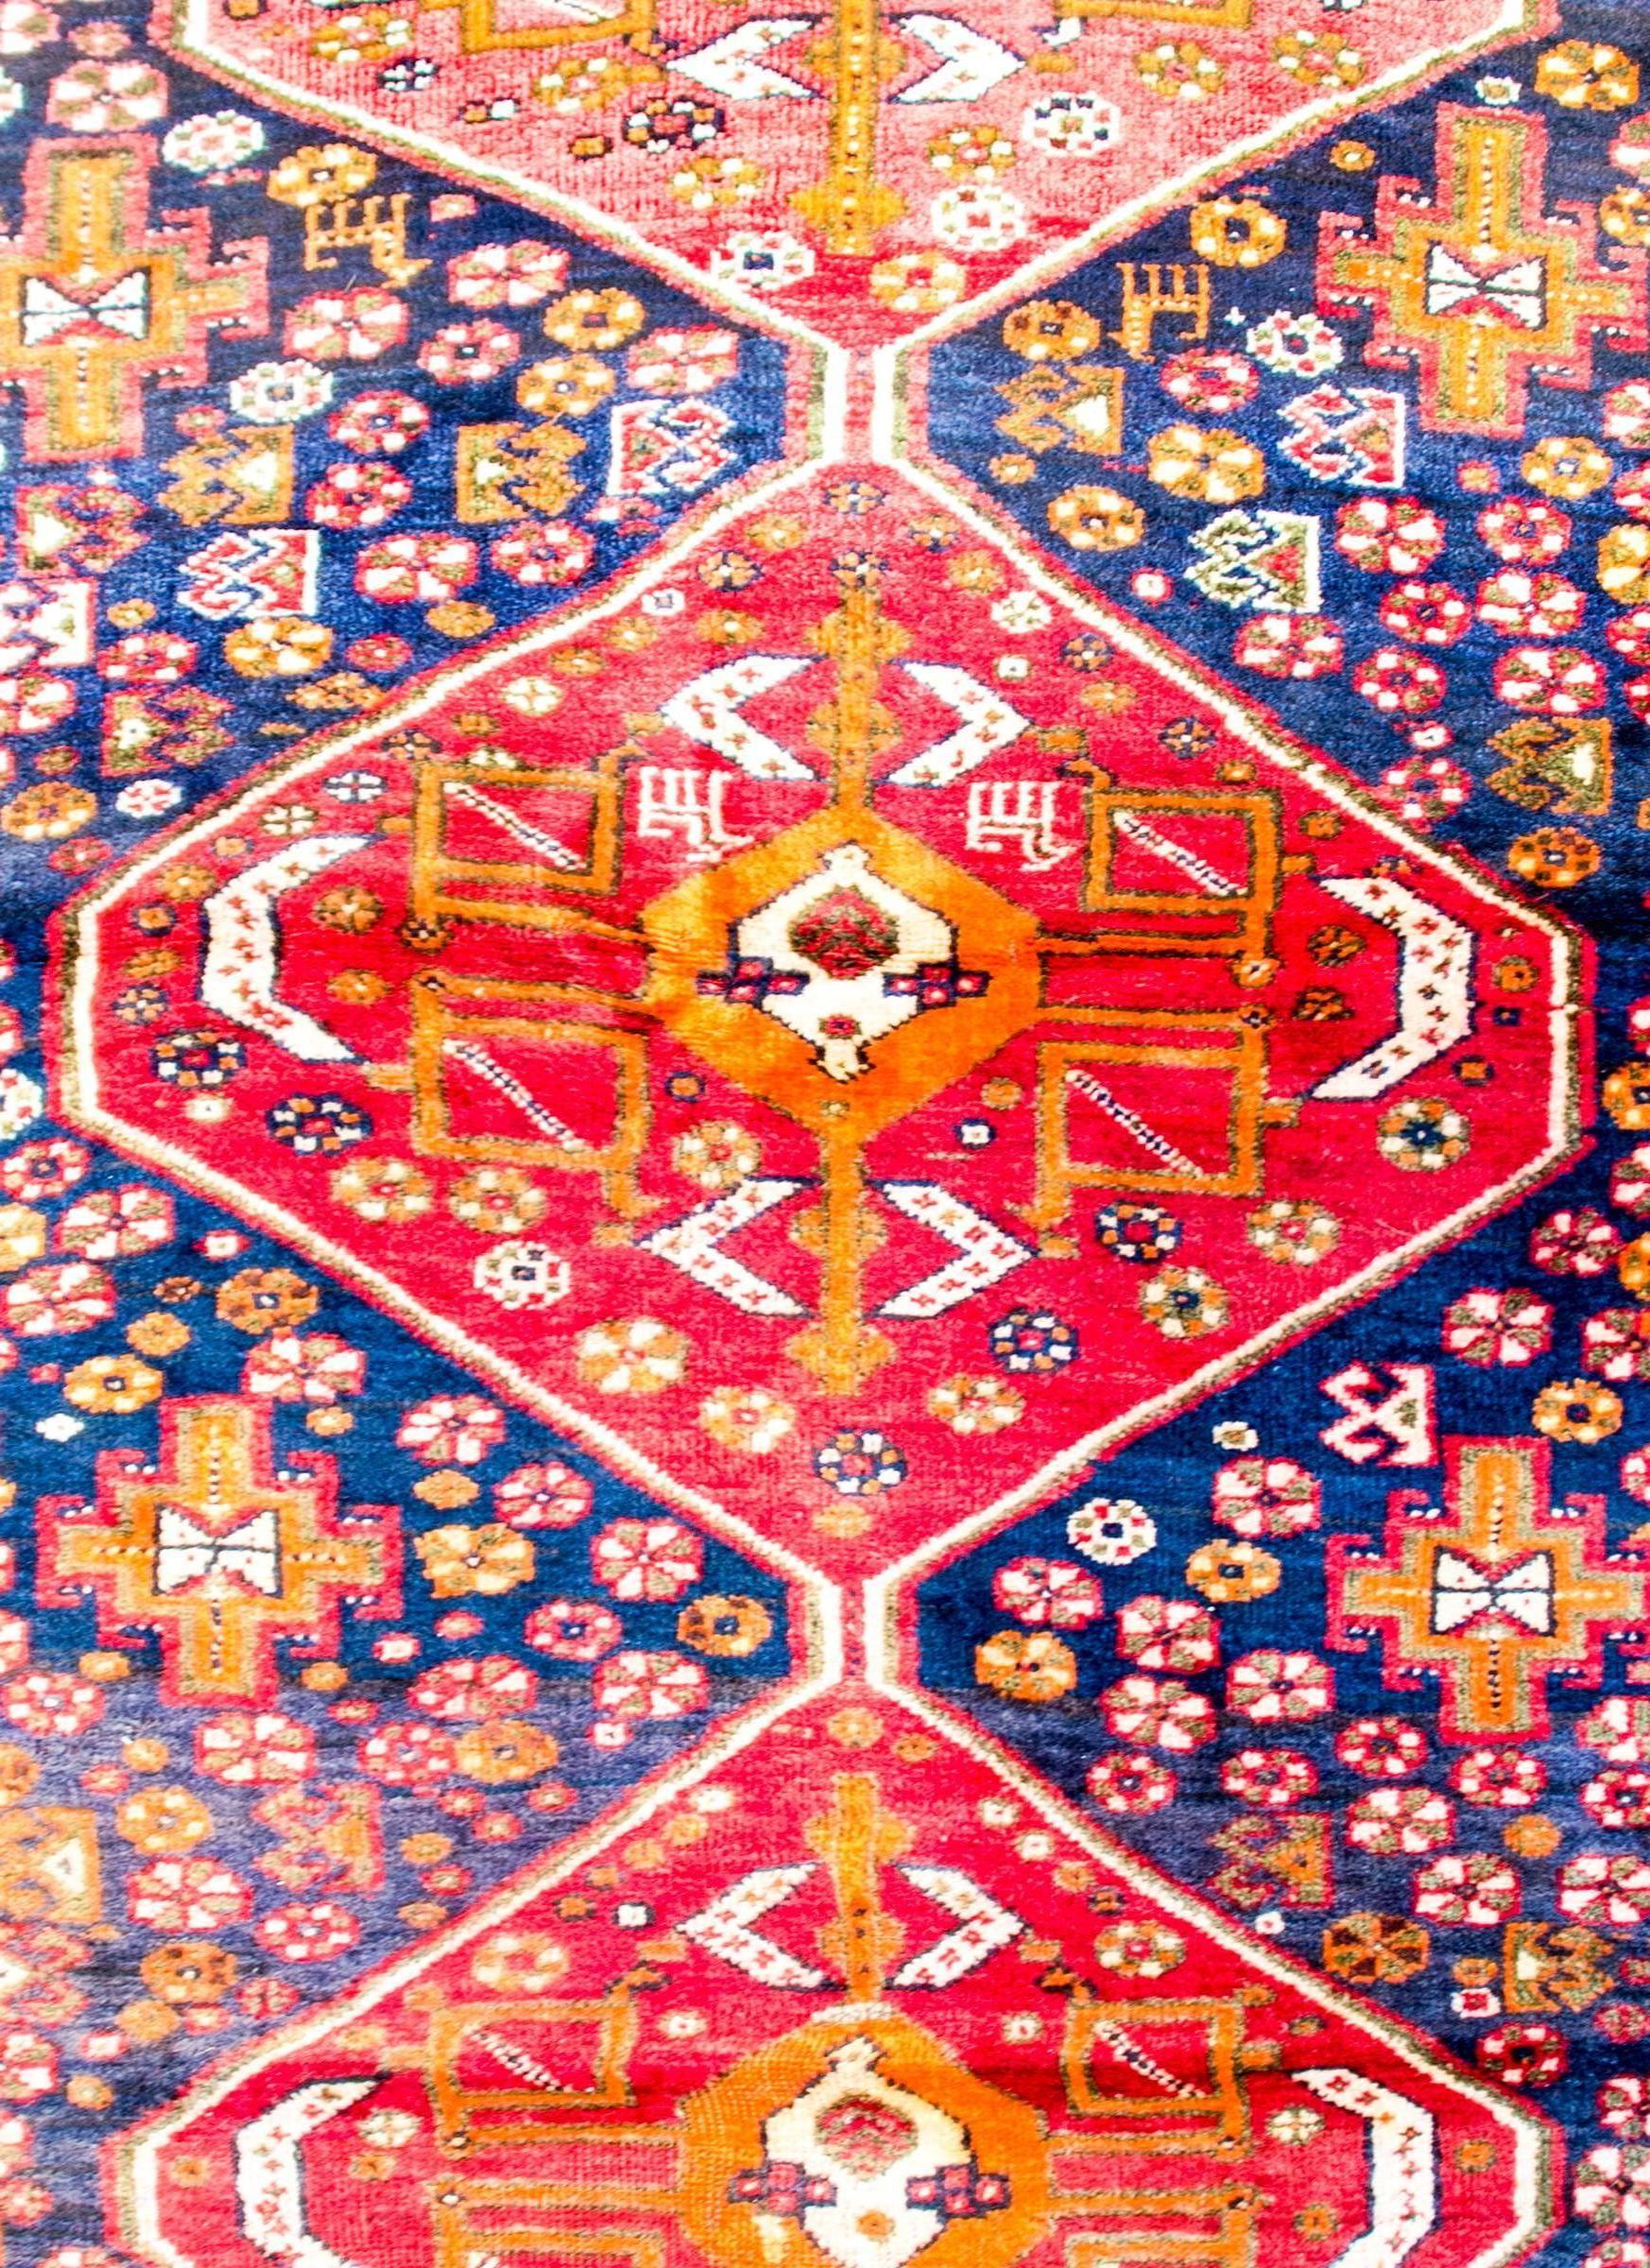 A brilliant mid-20th century Shiraz rug with an incredibly woven pattern containing three large central diamond medallions, each with multiple stylized flowers, all woven in crimson, white, and gold, on bright crimson backgrounds. The medallions